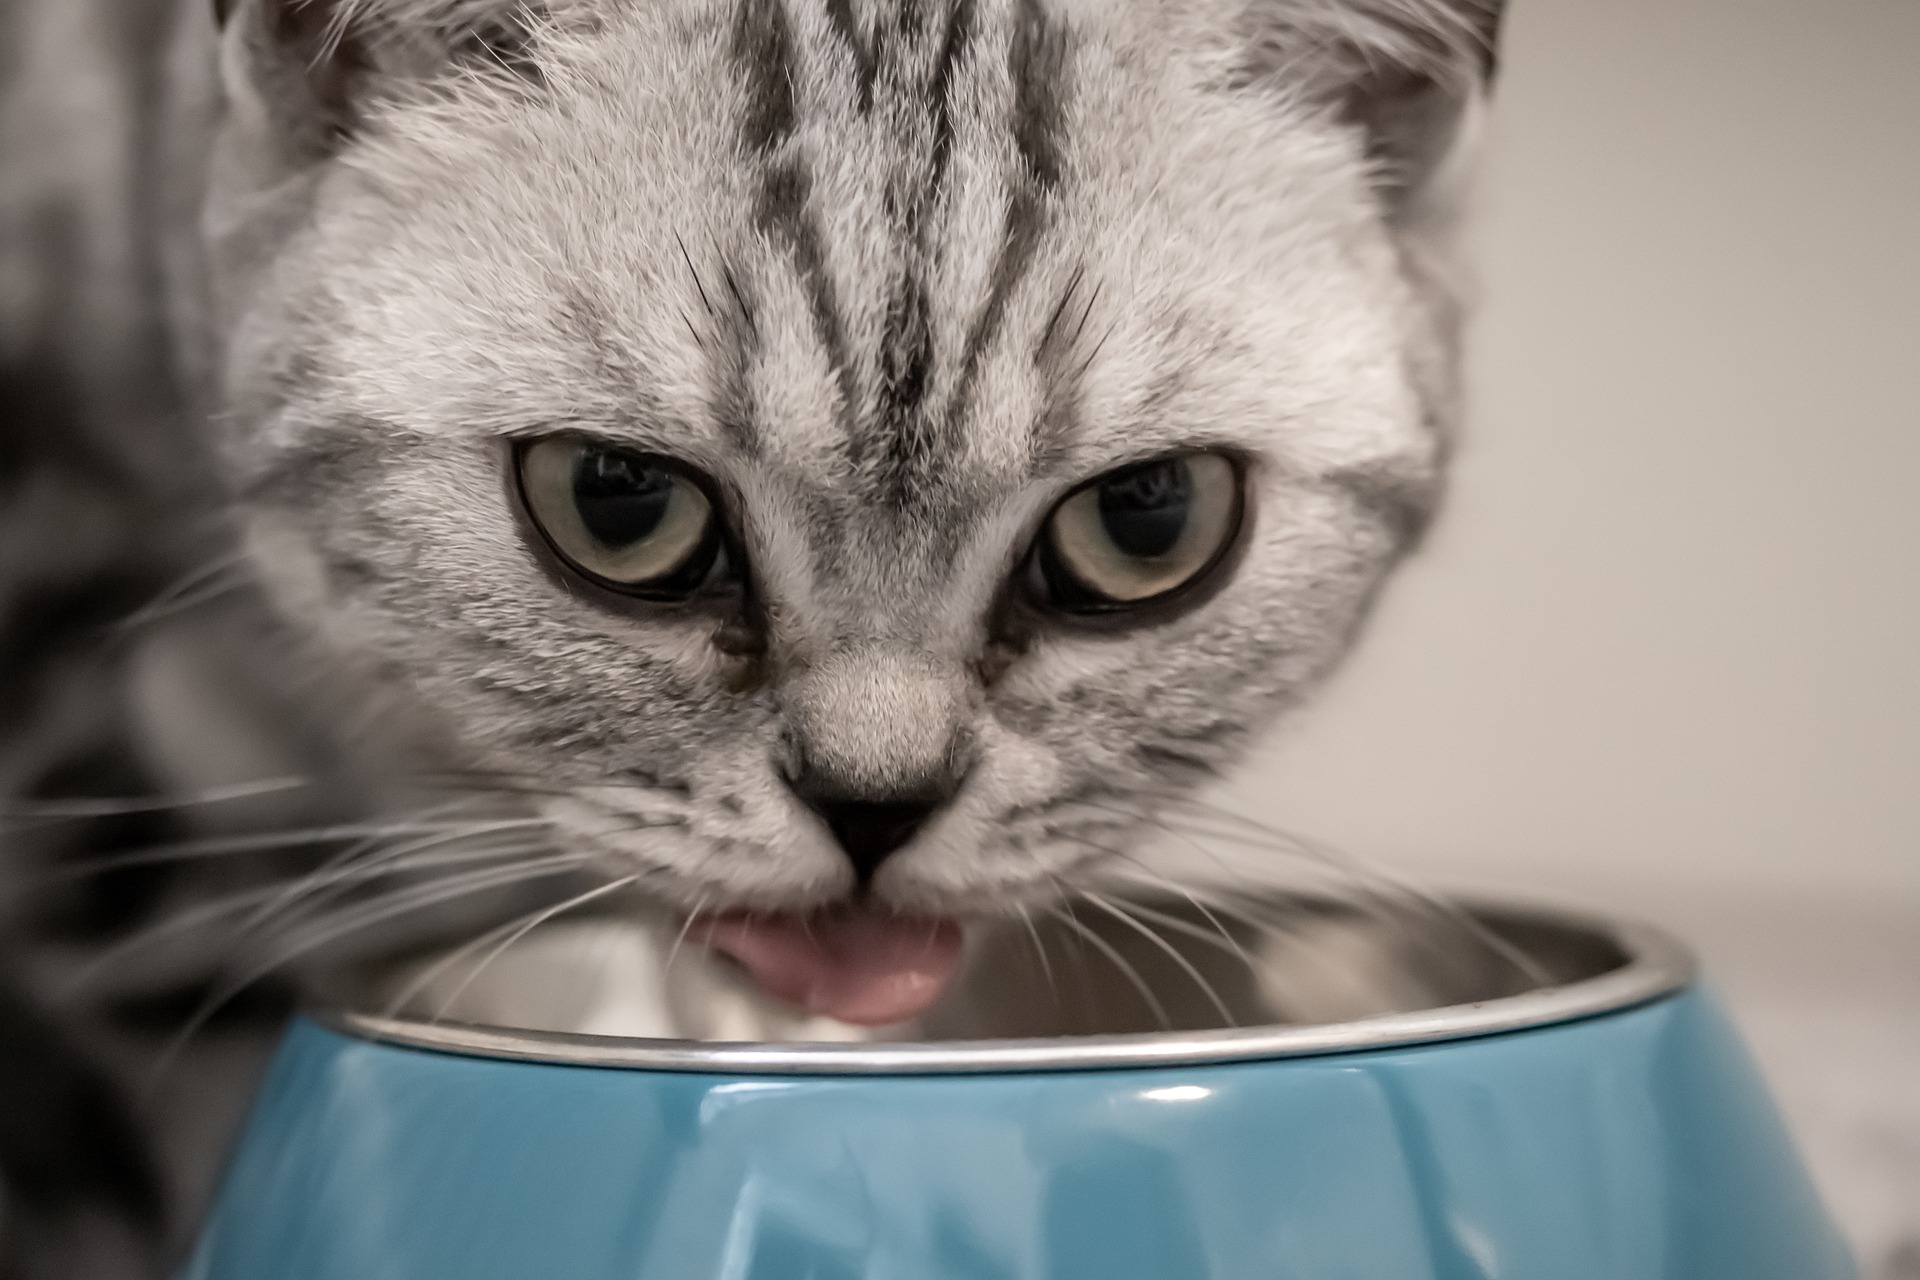 Grey cat eating out of a blue bowl indoors